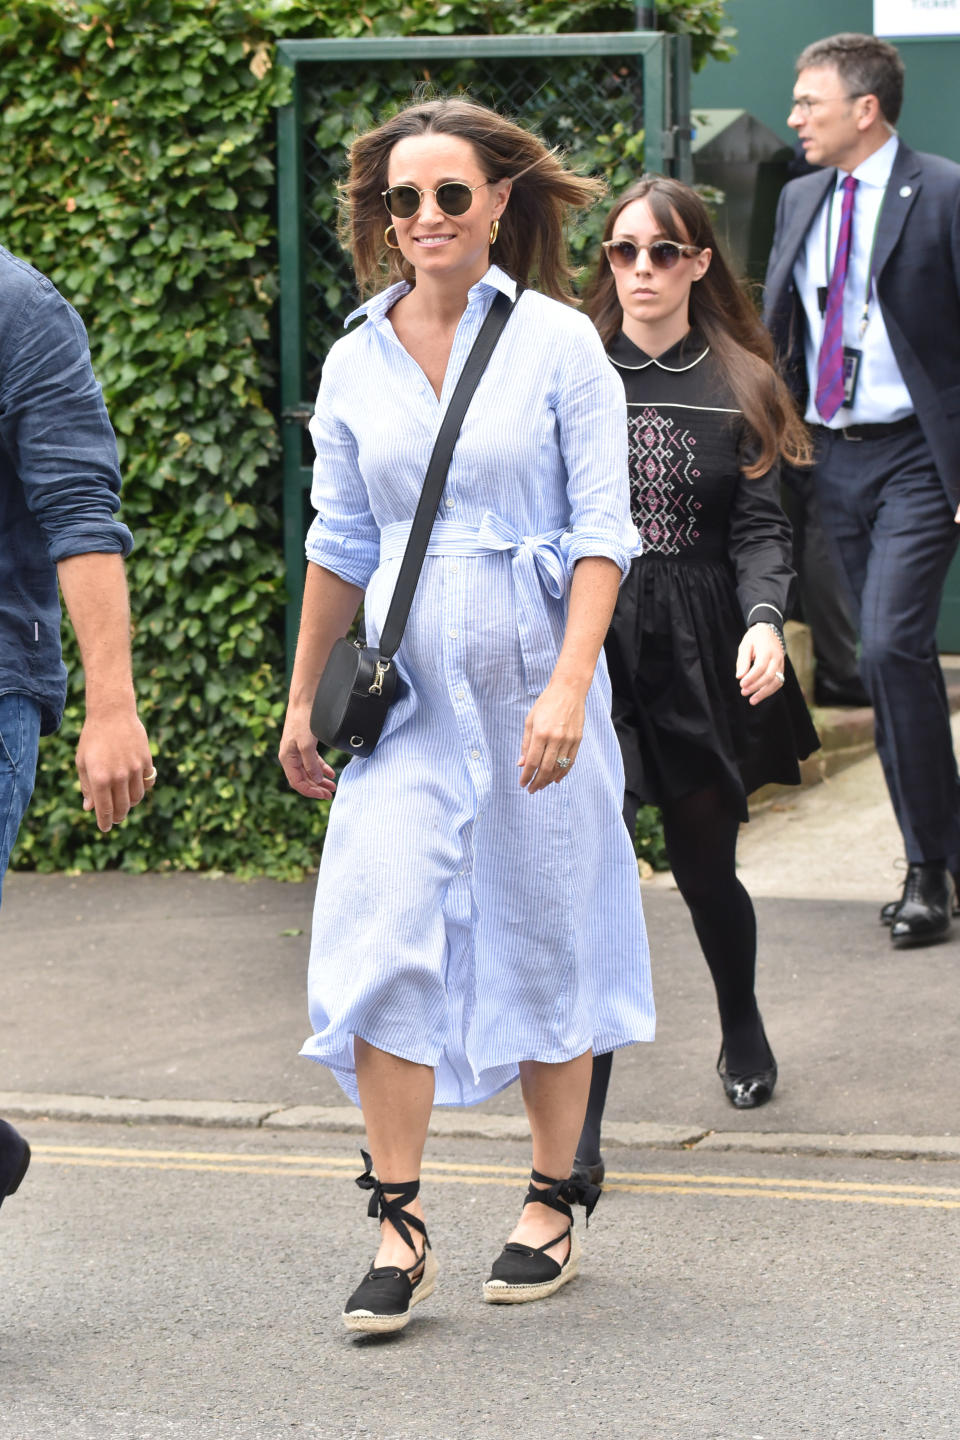 <p>For day nine of Wimbledon 2018, Pippa Middleton made a surprise appearance alongside her mother, Carole. The Duchess of Cambridge’s sister dressed her bump in a £117.67 Ralph Lauren shirt <a rel="nofollow noopener" href="https://www.saksfifthavenue.com/polo-ralph-lauren-striped-shirt-dress/product/0400097692208?LScreativeid=1&siteID=k.8oqcSrcmY-6XOwwjAJ4MOADqEhqVEmNg&site_refer=AFF001&ranSiteID=k.8oqcSrcmY-6XOwwjAJ4MOADqEhqVEmNg&mid=13816&ranMID=13816&ranEAID=k*8oqcSrcmY&LSoid=365991&LSlinkid=10" target="_blank" data-ylk="slk:dress" class="link ">dress</a> and in a surpising fashion move, finished the look with a Pop and Suki cross-body bag. <em>[Photo: Getty]</em> </p>